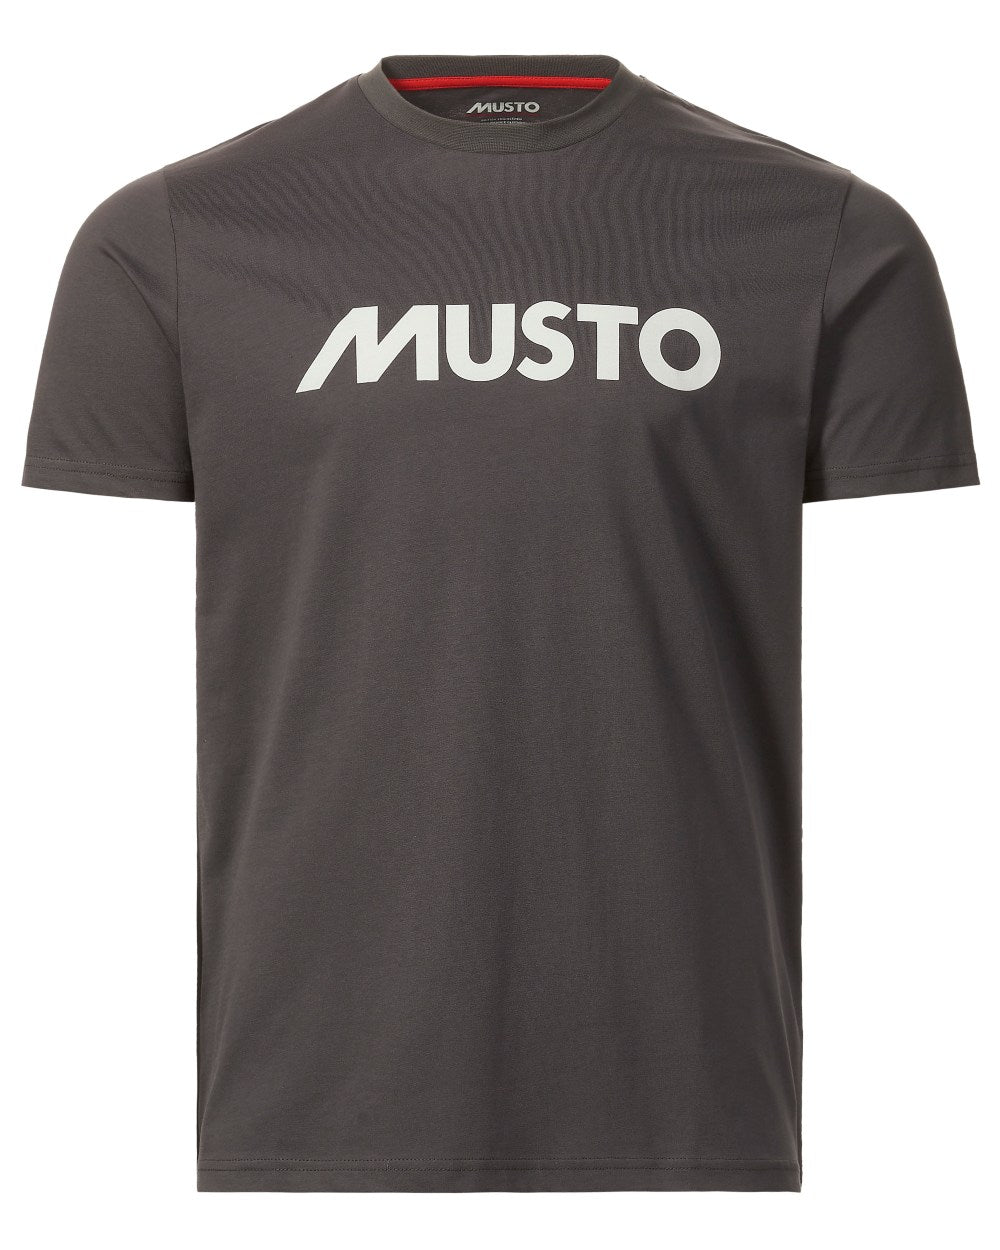 Carbon Coloured Musto Logo Tee On A White Background 